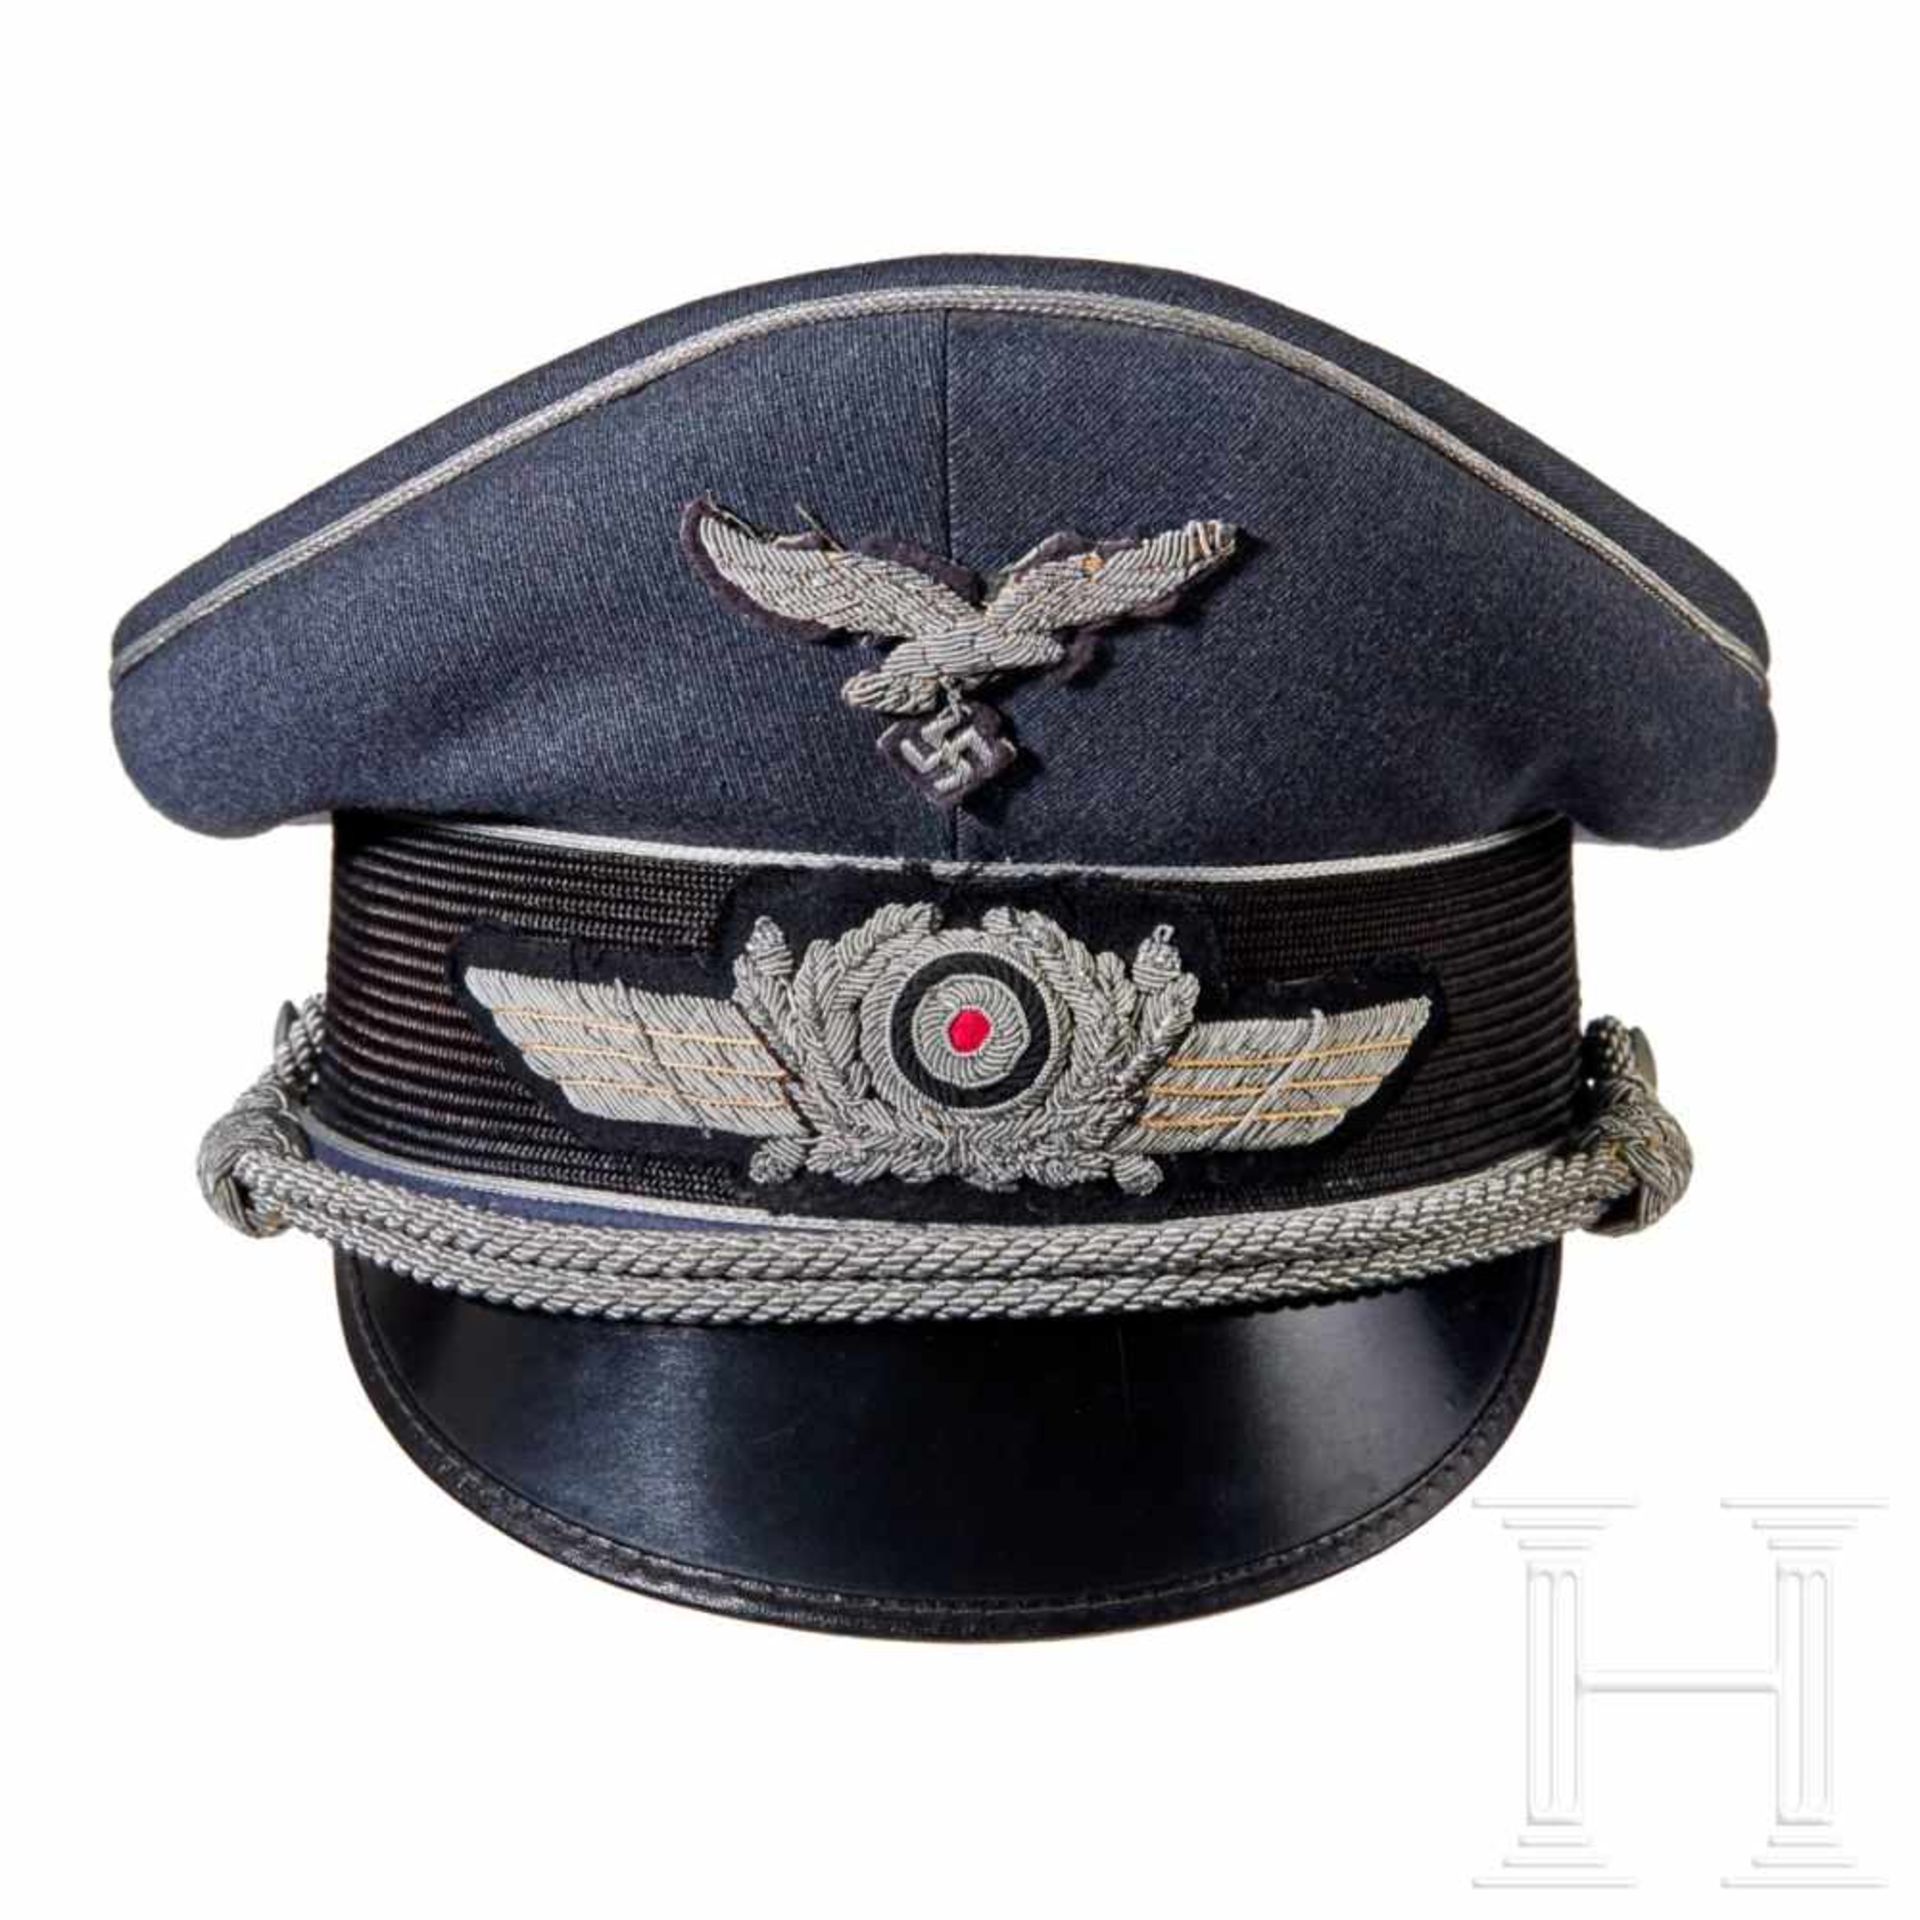 A visor cap for officers of the LuftwaffeBlue-grey finely ribbed tricot wool body with black - Bild 4 aus 9